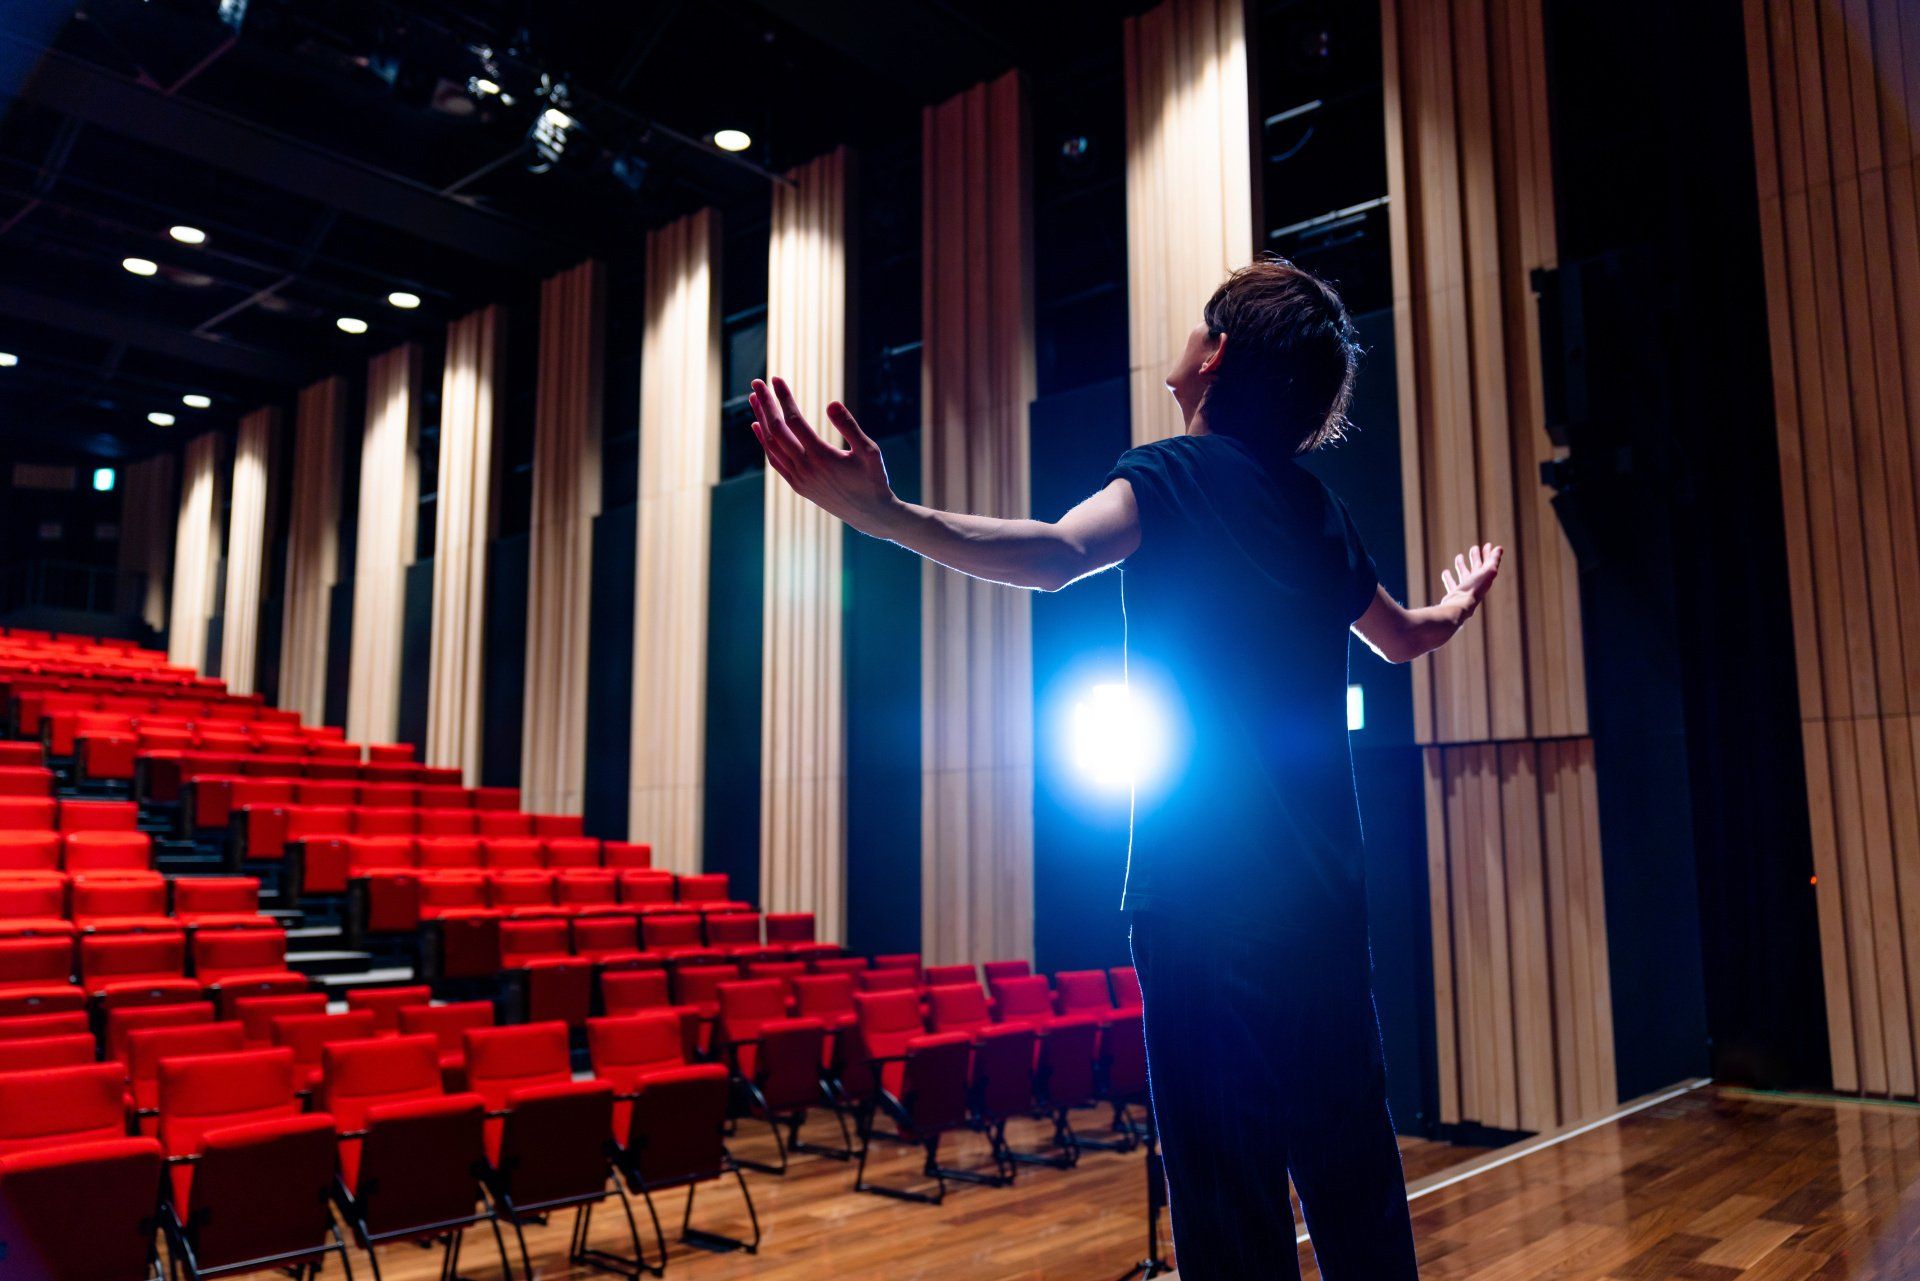 A young person practicing a speech to an empty theatre